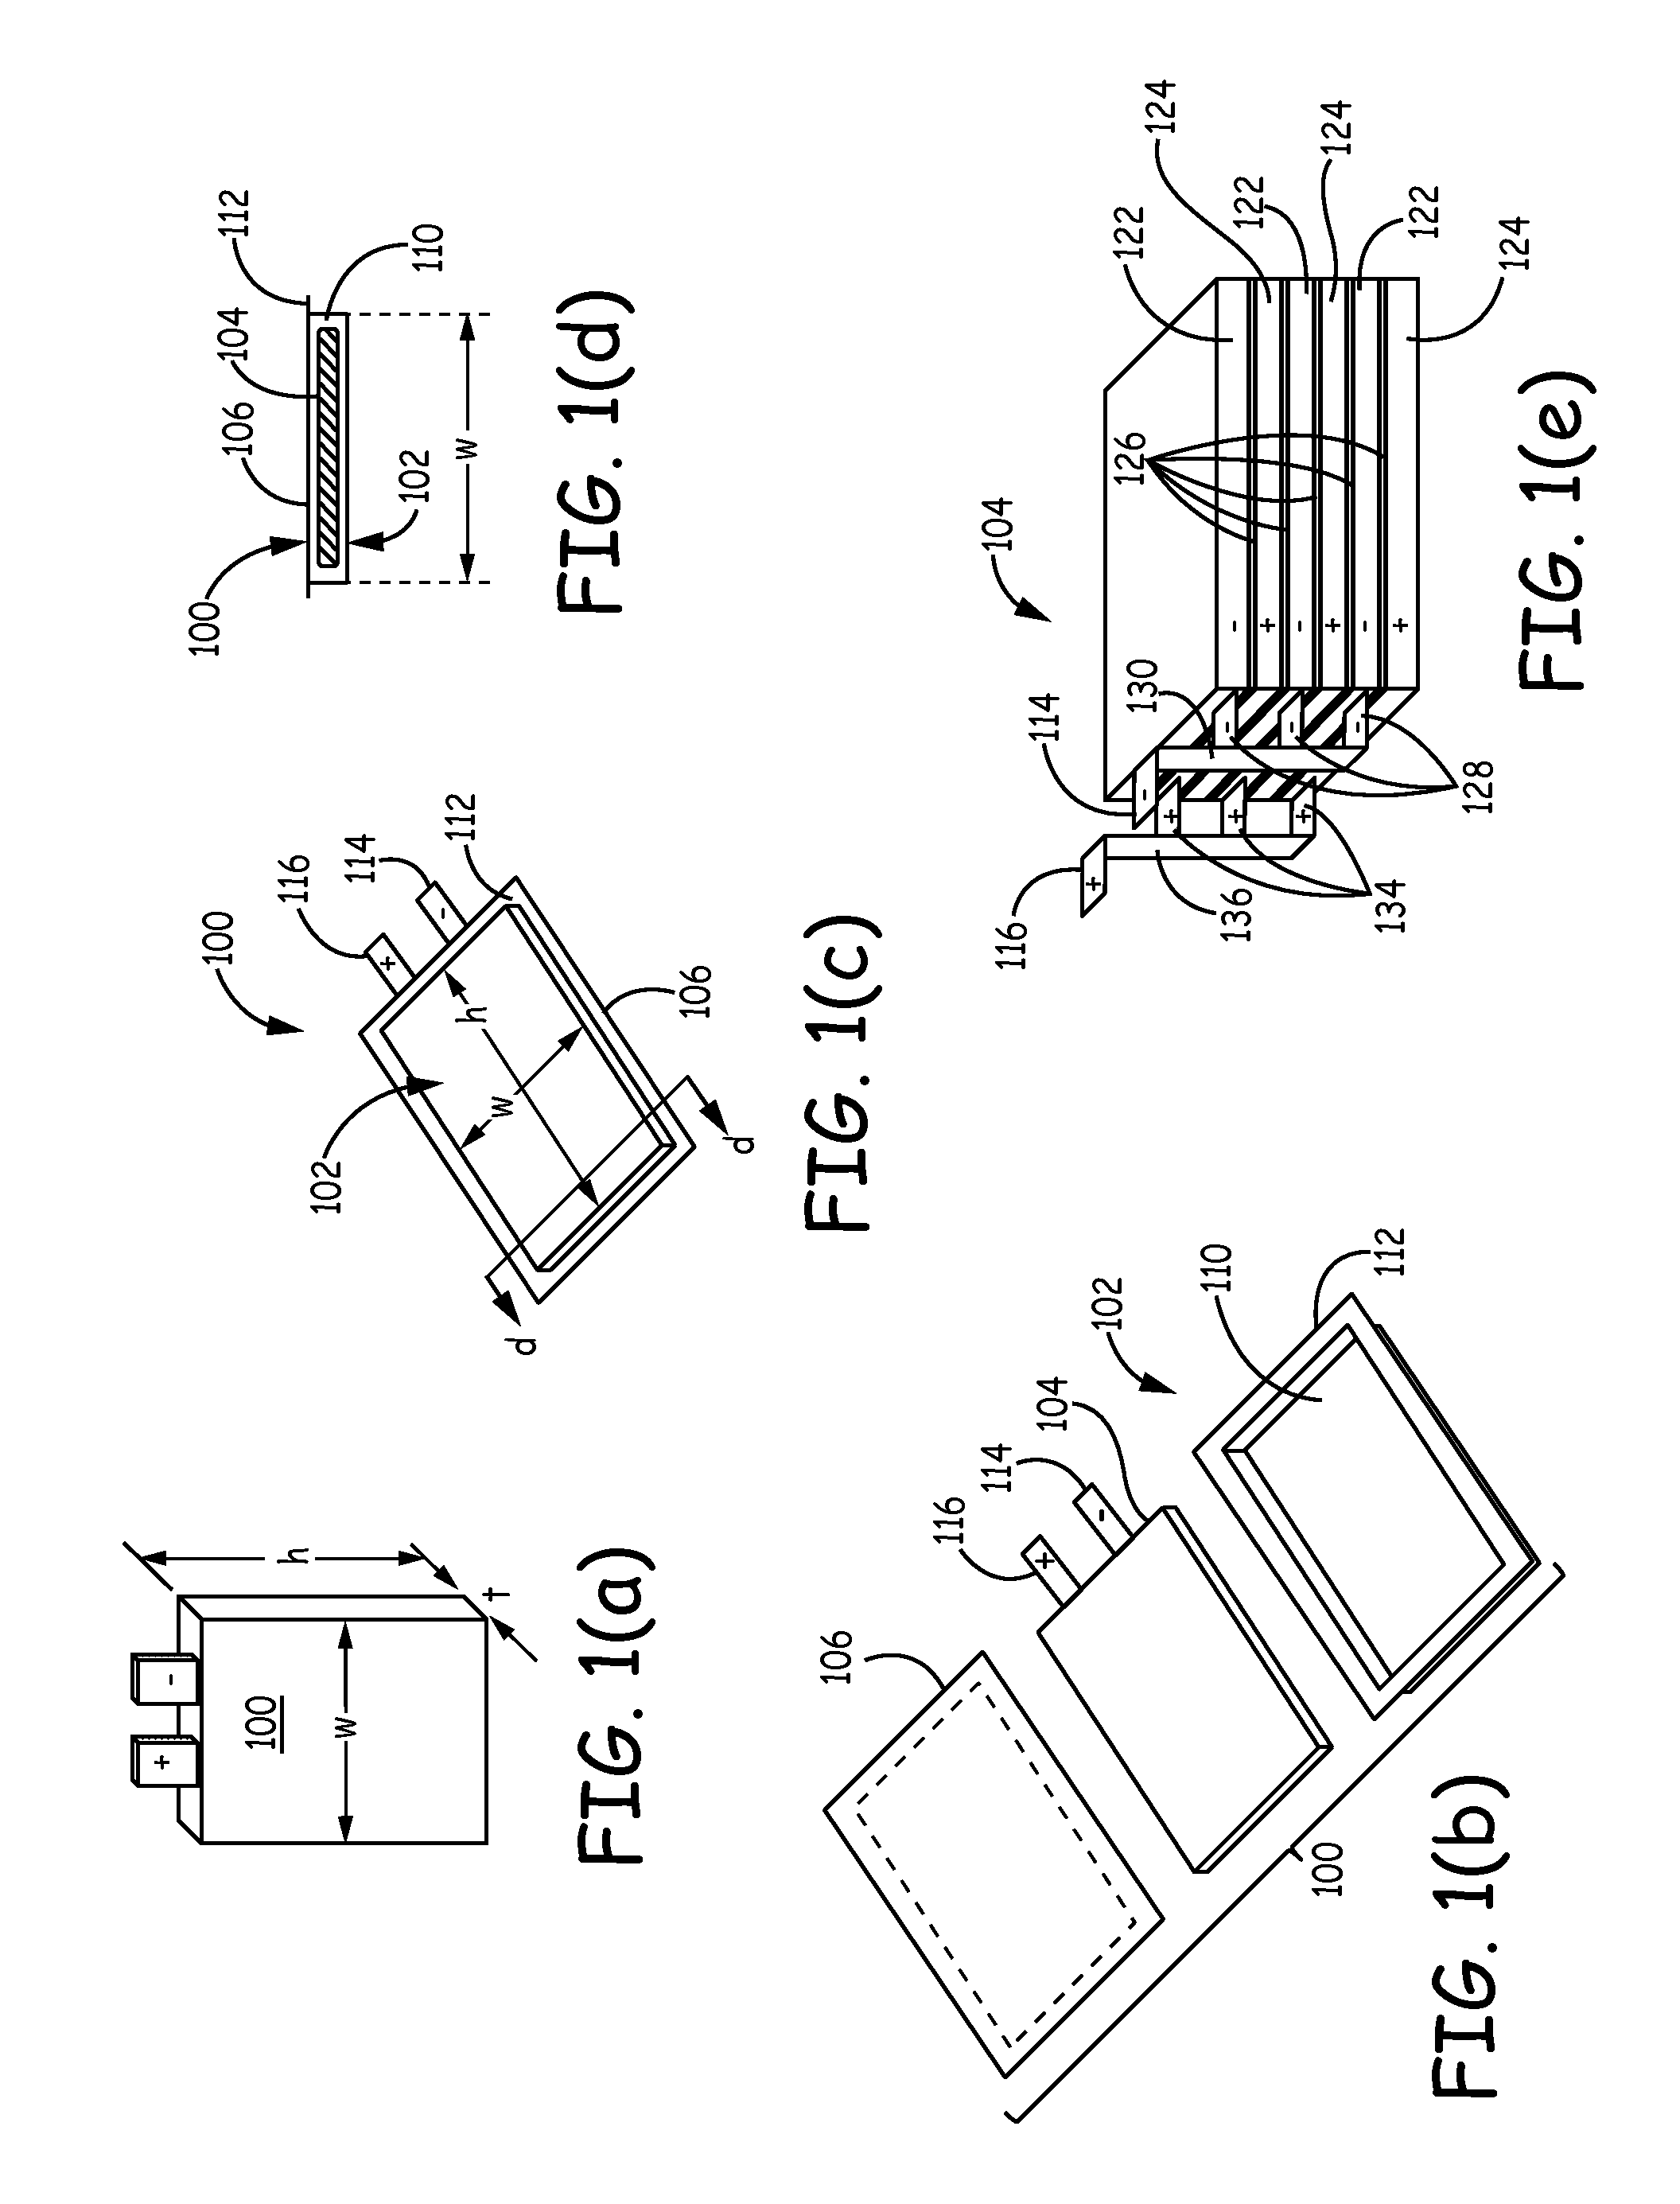 Silicon-based active materials for lithium ion batteries and synthesis with solution processing